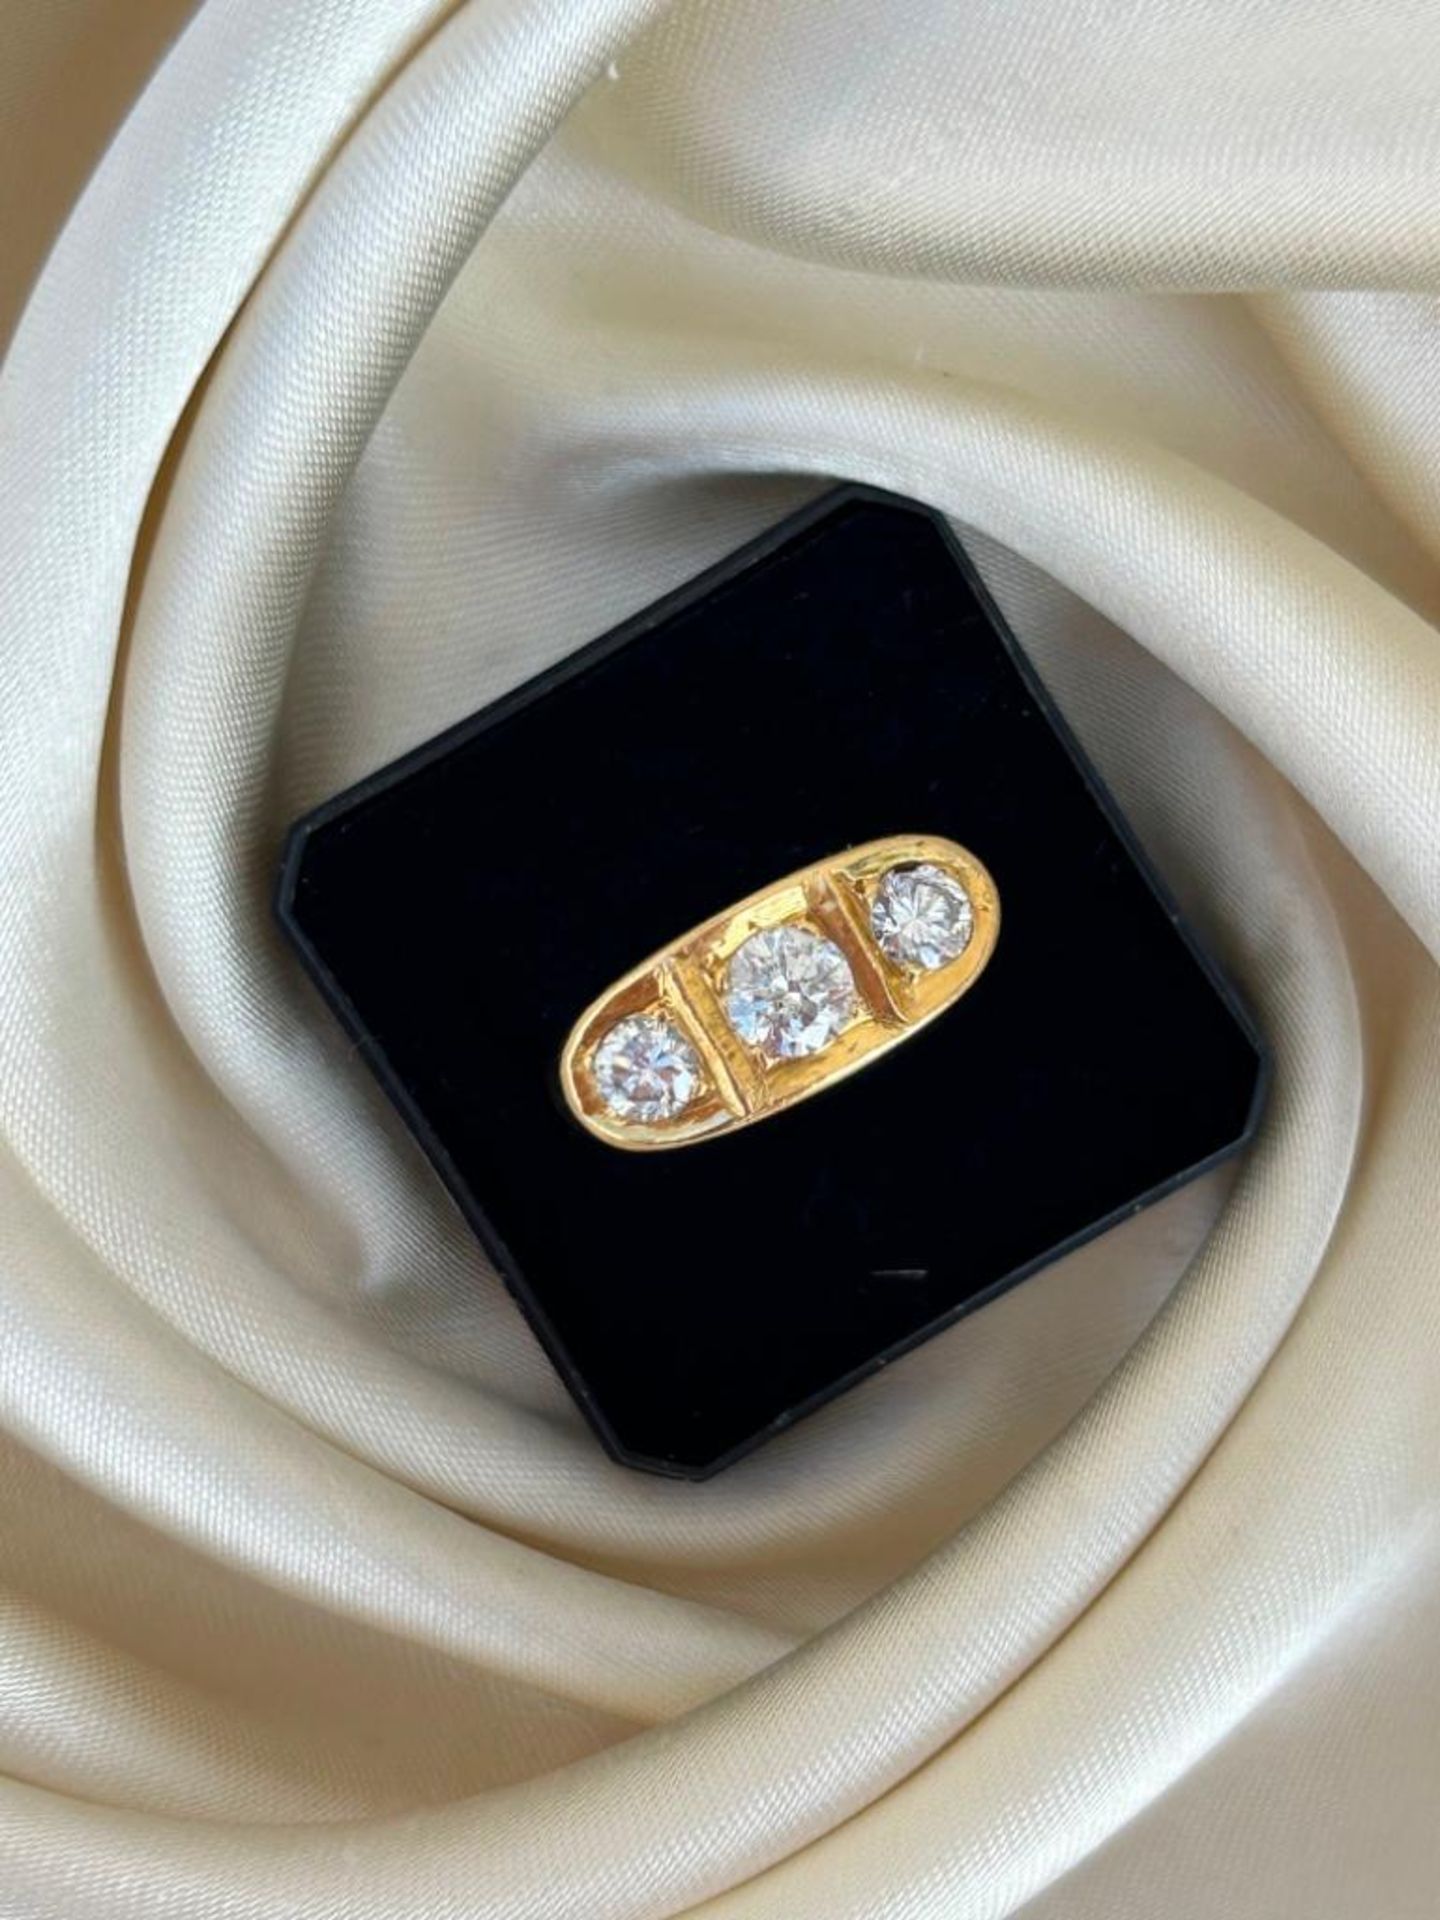 Giant Diamond 3 Stone Ring in 18ct Yellow Gold Approx 1 Carat 40 Total - Image 2 of 6